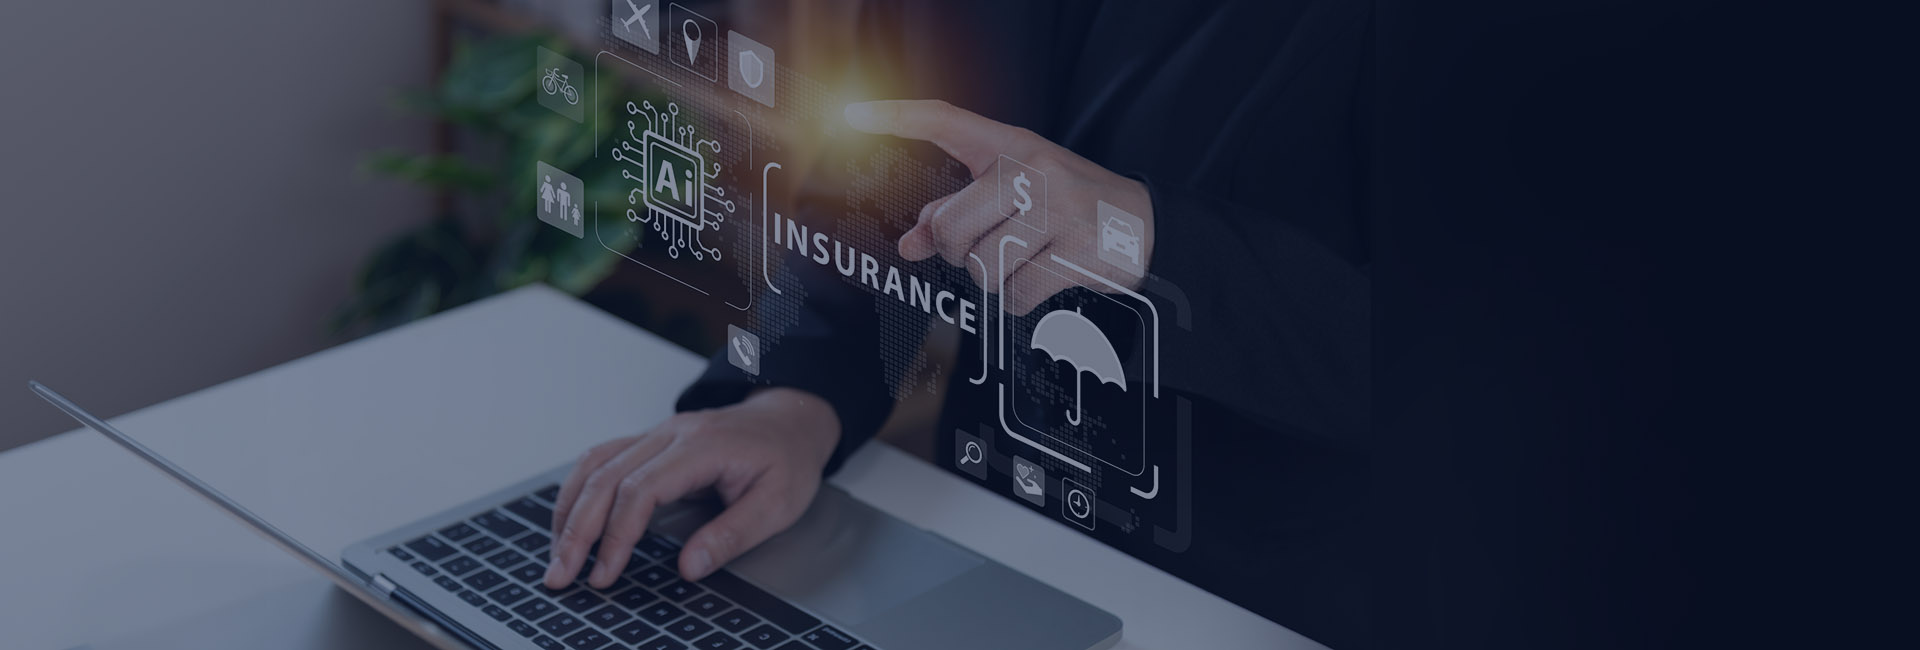 Insuring the Future - How AI is Revolutionizing the Insurance Industry